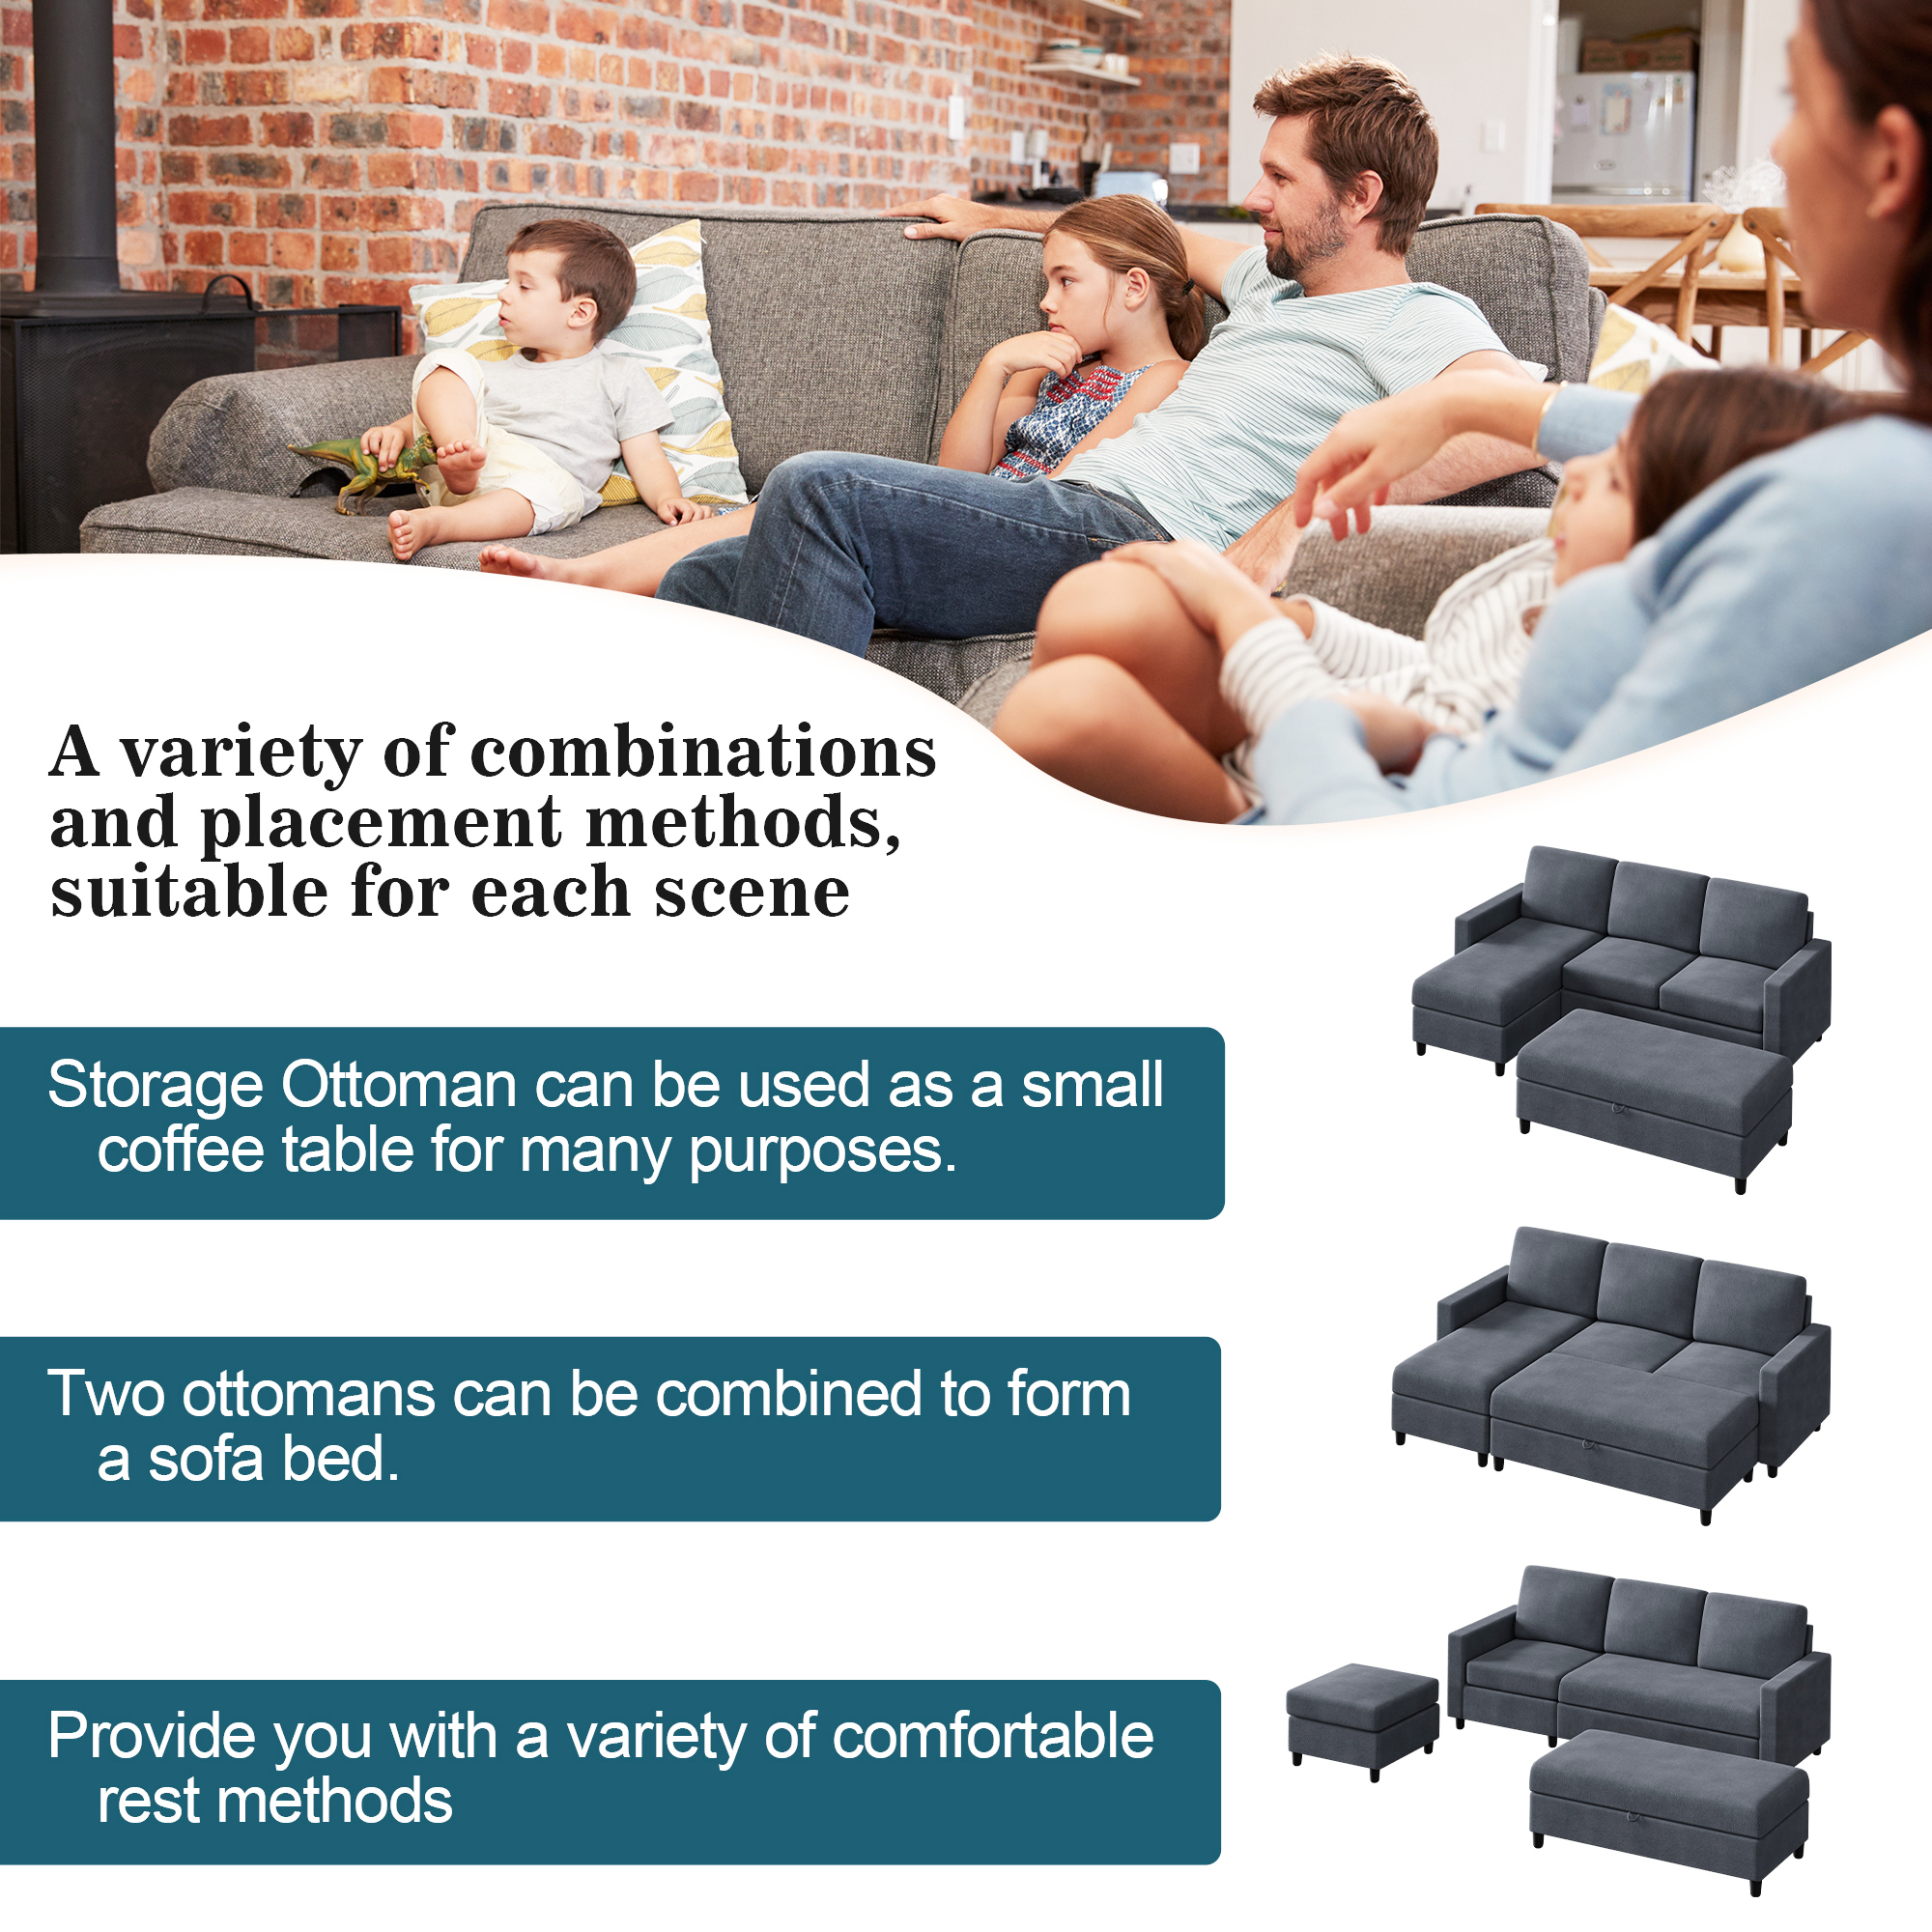 Walsunny Sectional Sofa bed Linen Couch L Shaped 4 Seat with Storage Ottoman Dark Gray - image 2 of 7